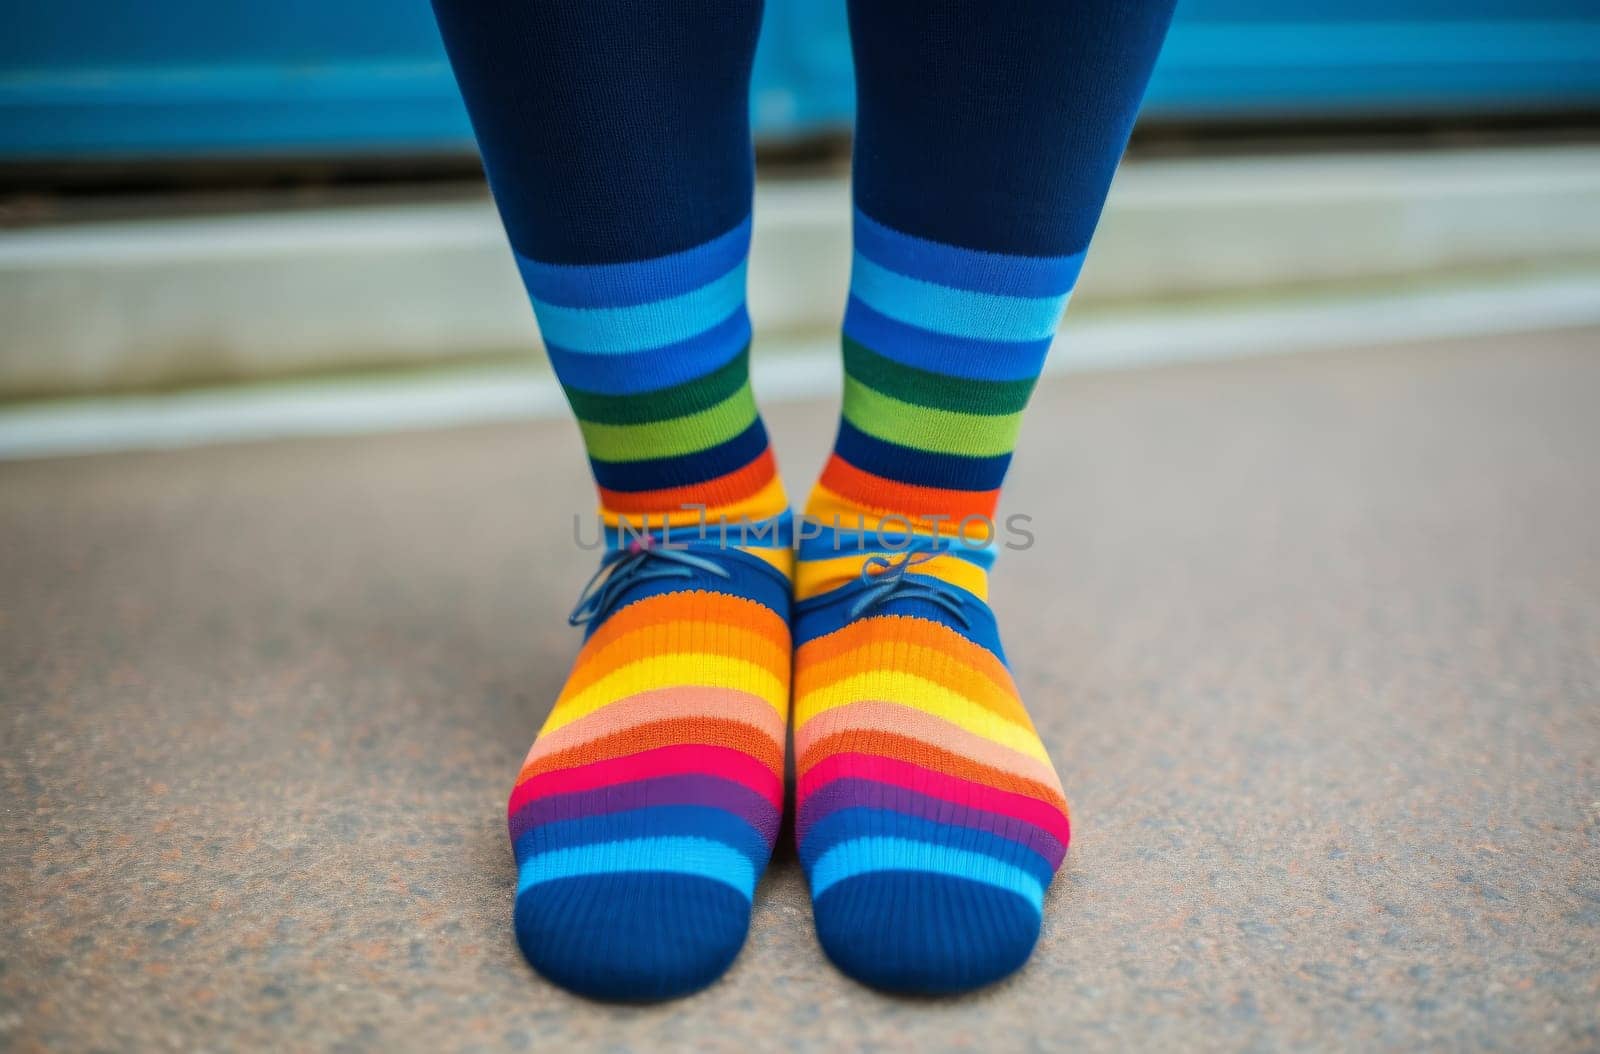 A photo of a person wearing a pair of multicolored socks that add a pop of color to their outfit